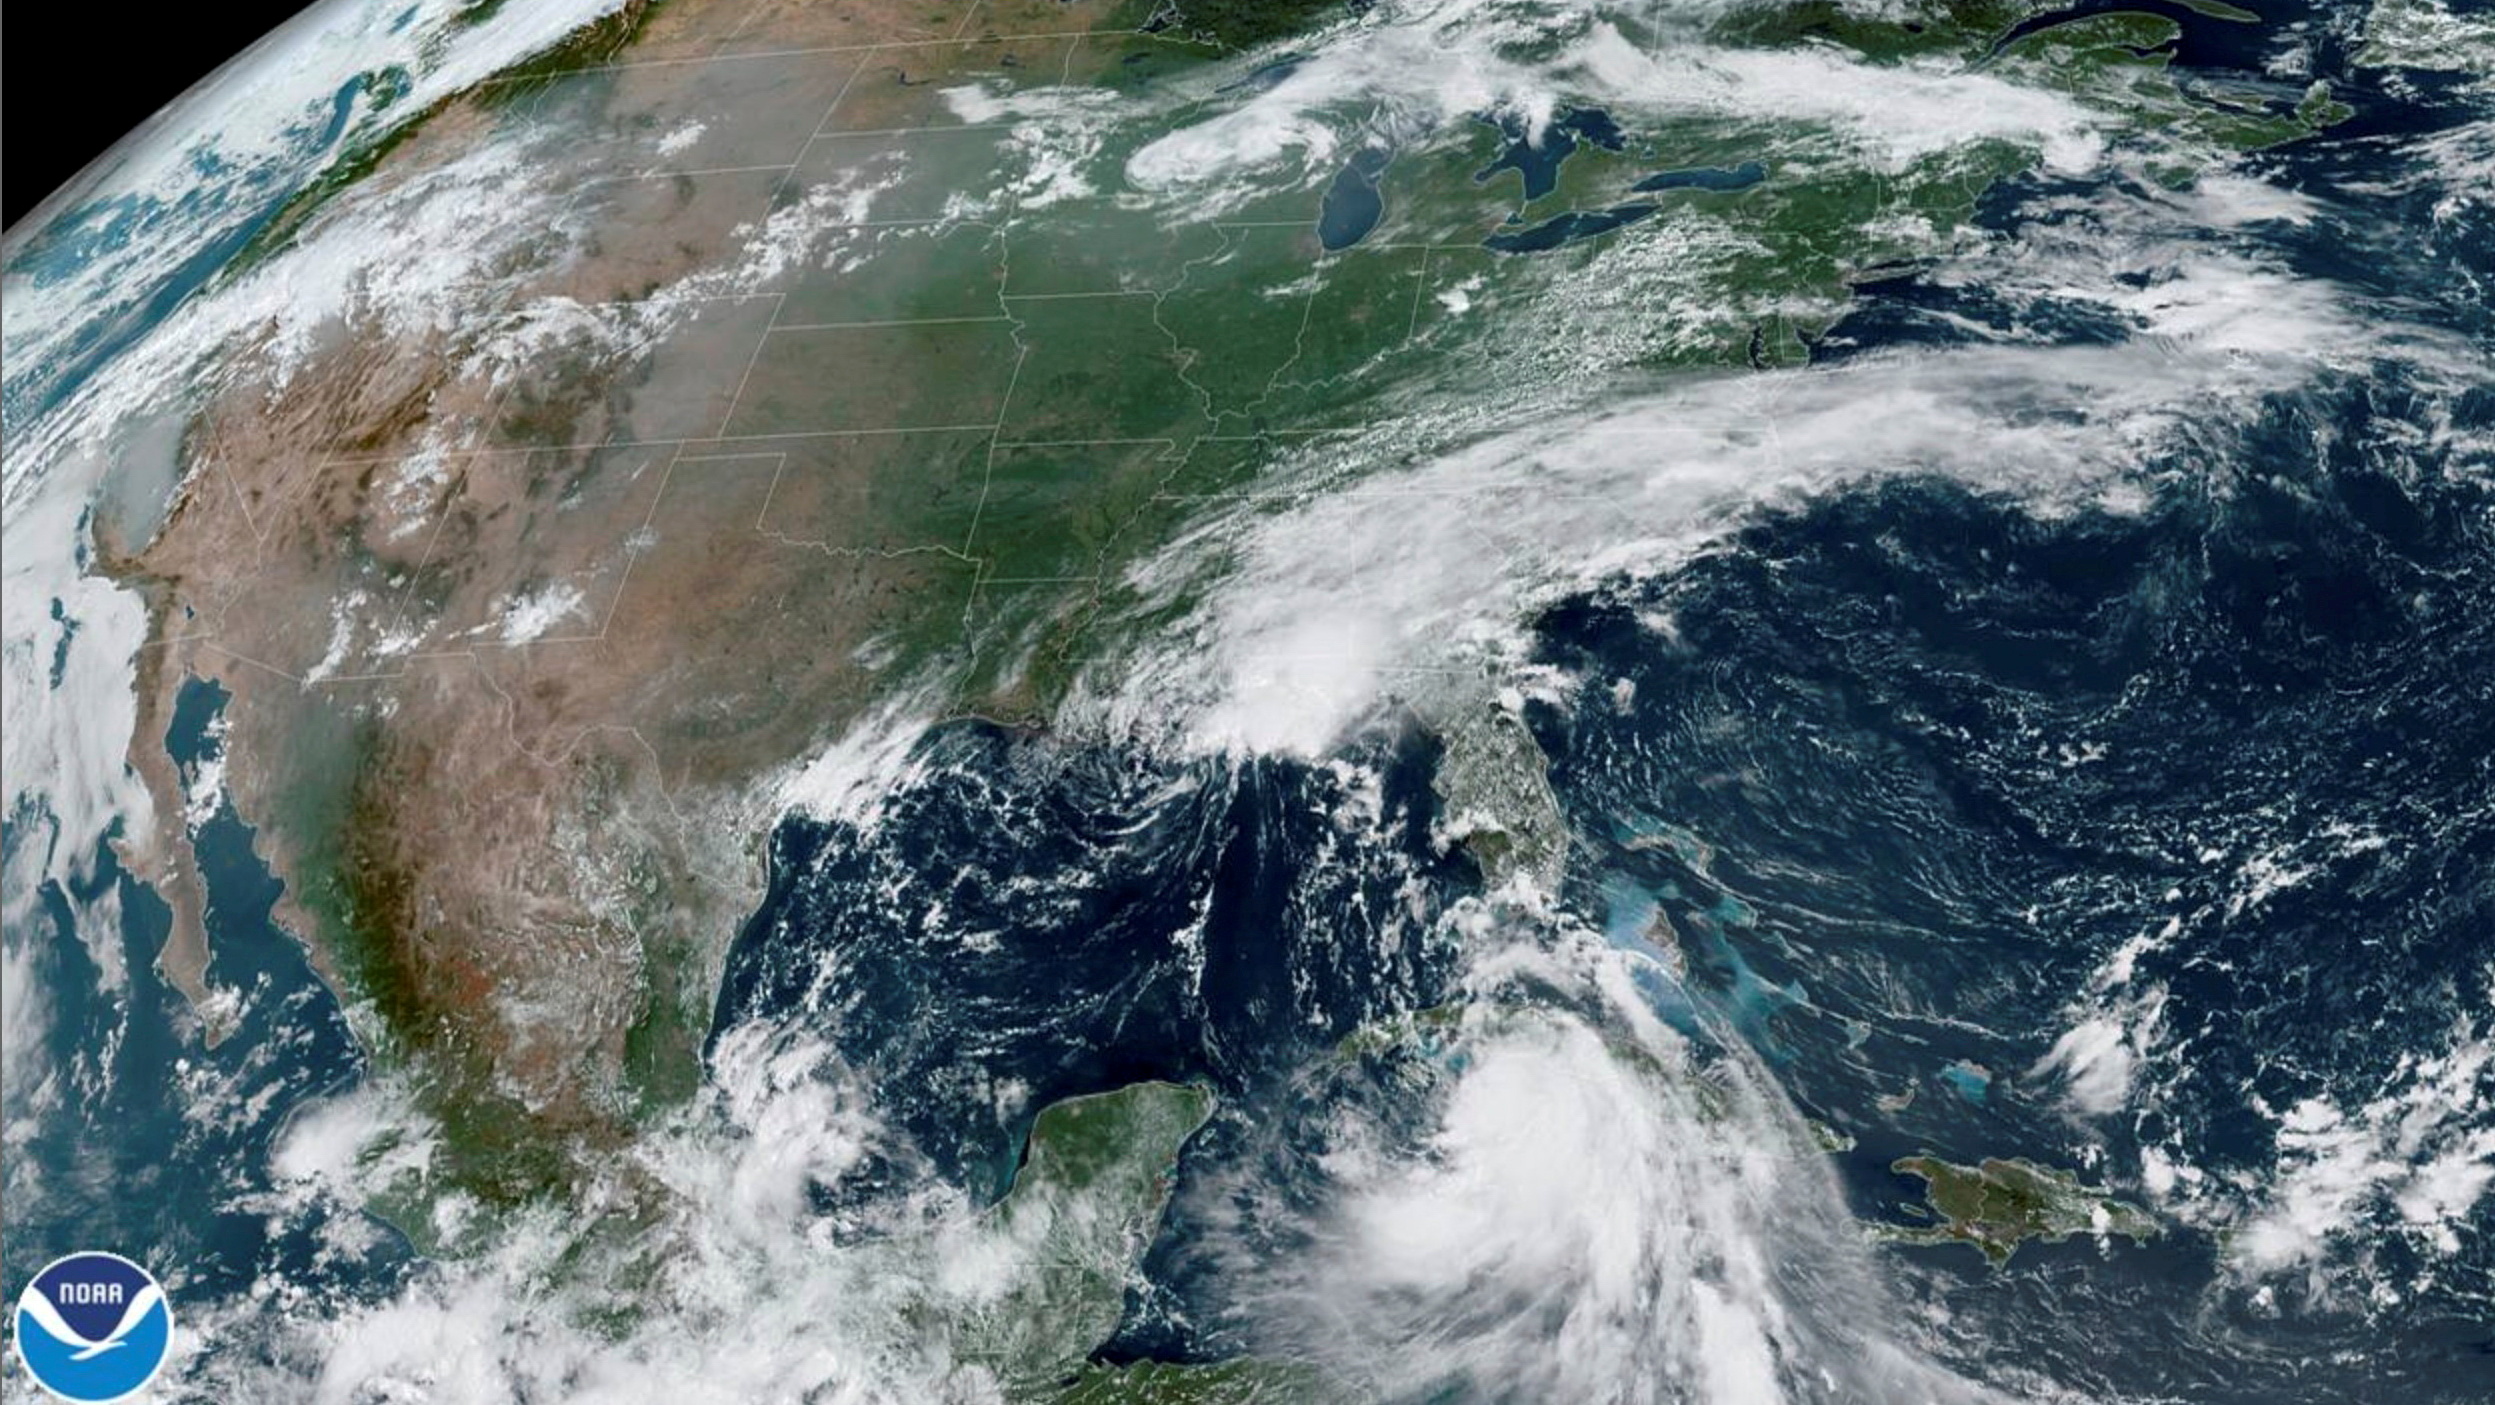 Tropical Storm Marco arrives at the coast of Louisiana as Tropical Storm Laura follows (bottom right) in an image from the National Oceanic and Atmospheric Administration (NOAA) GOES-East satellite August 24, 2020. CIRA/NOAA/Handout via REUTERS. 